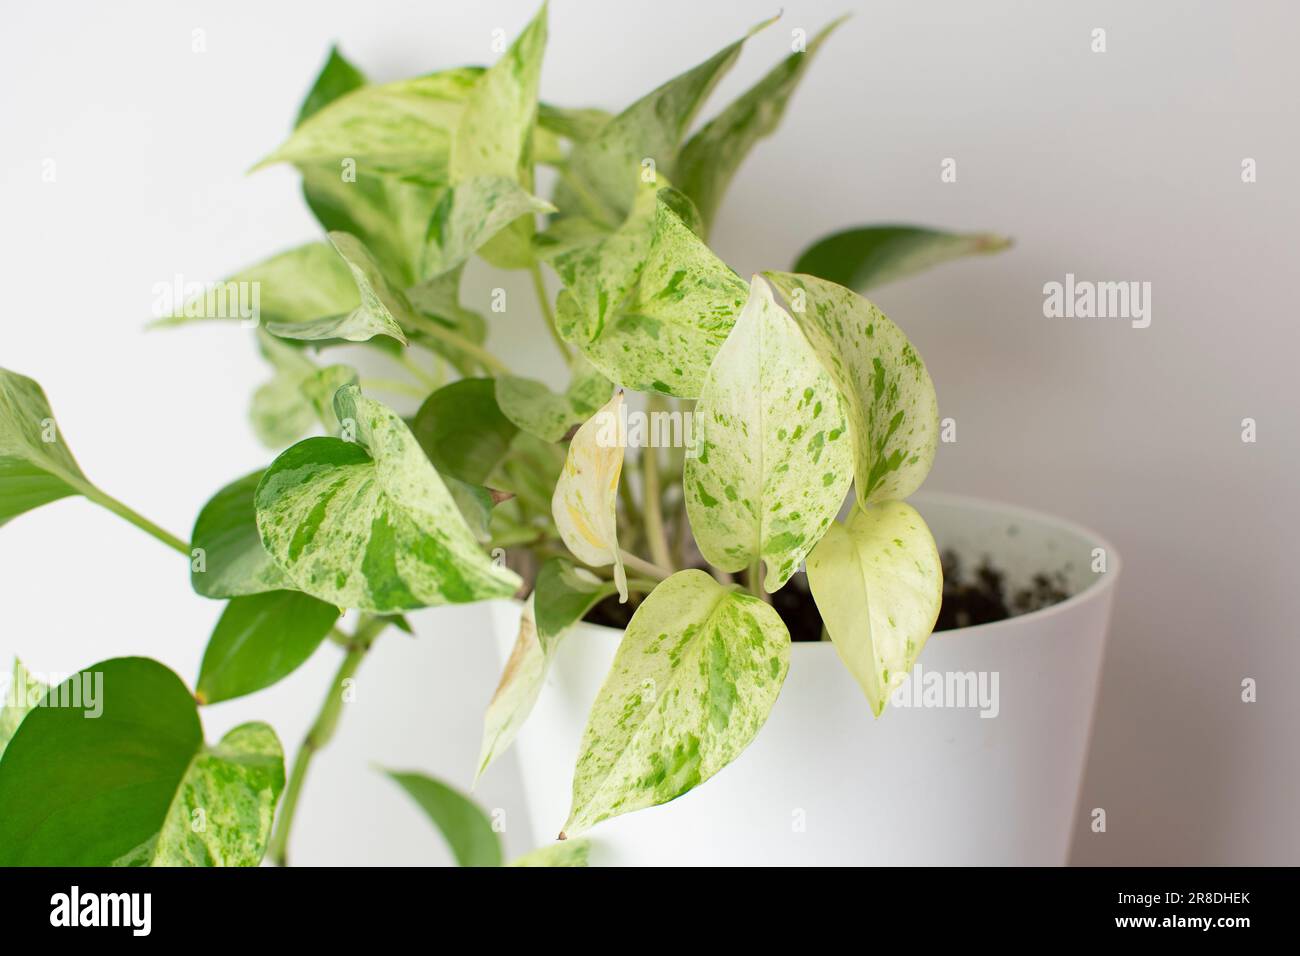 The white and green variegated leaves of Marble Queen Pothos (Snow queen pothos) Stock Photo